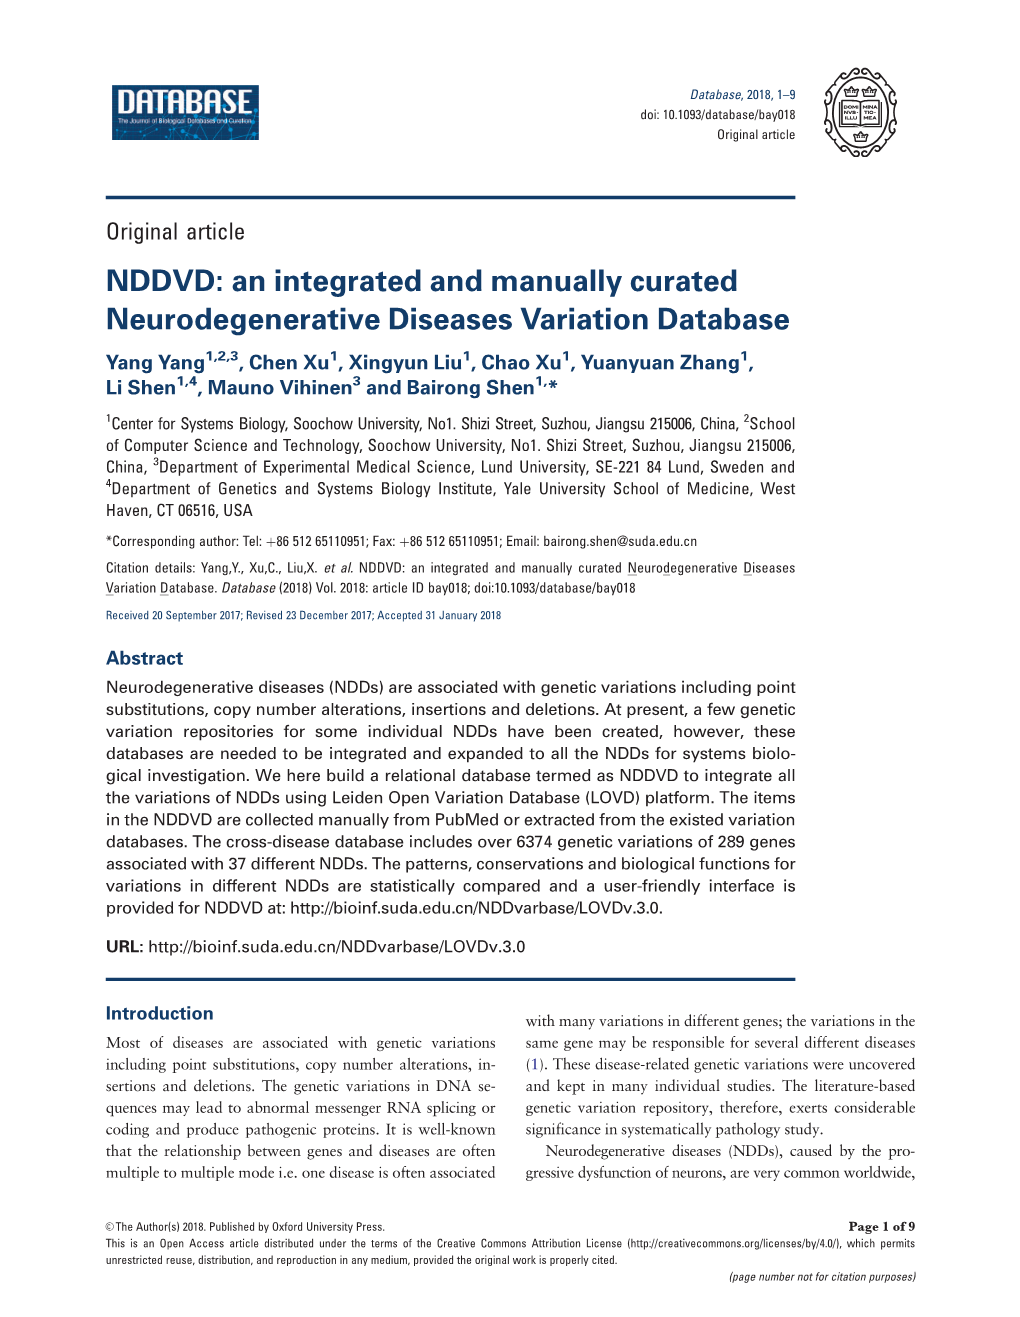 An Integrated and Manually Curated Neurodegenerative Diseases